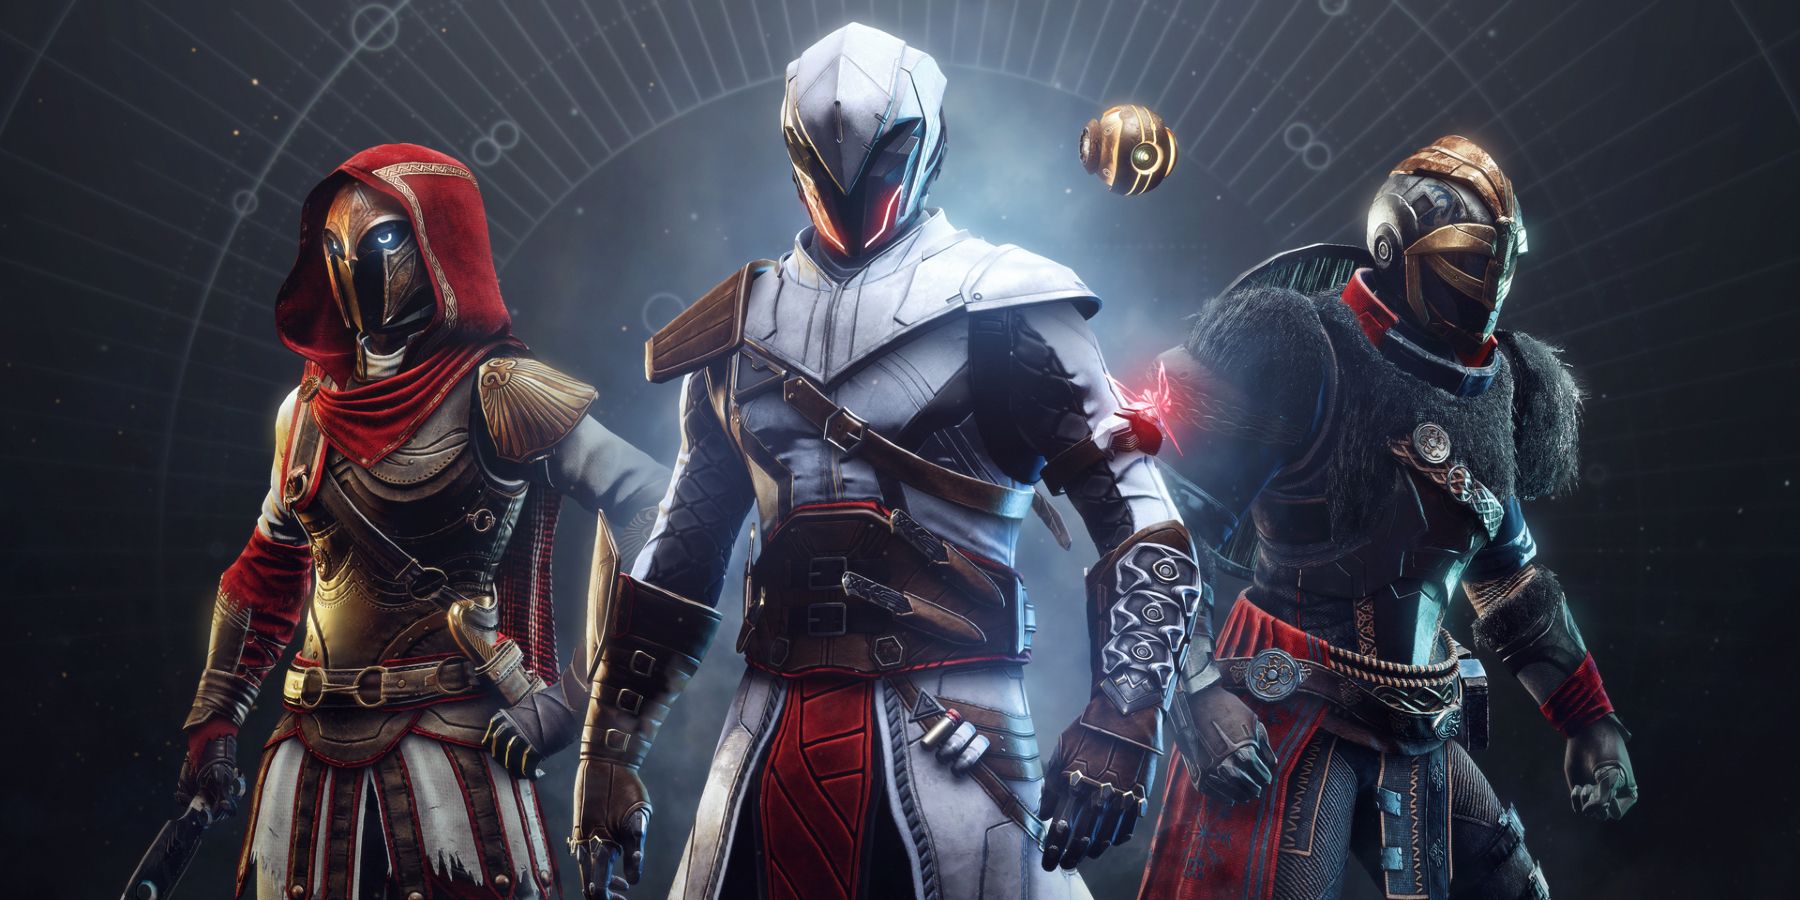 Image of Assassin's Creed Cosmetic Items In Destiny 2 of Altaïr's, Eivor's, and Kassandra's Assassins robes.